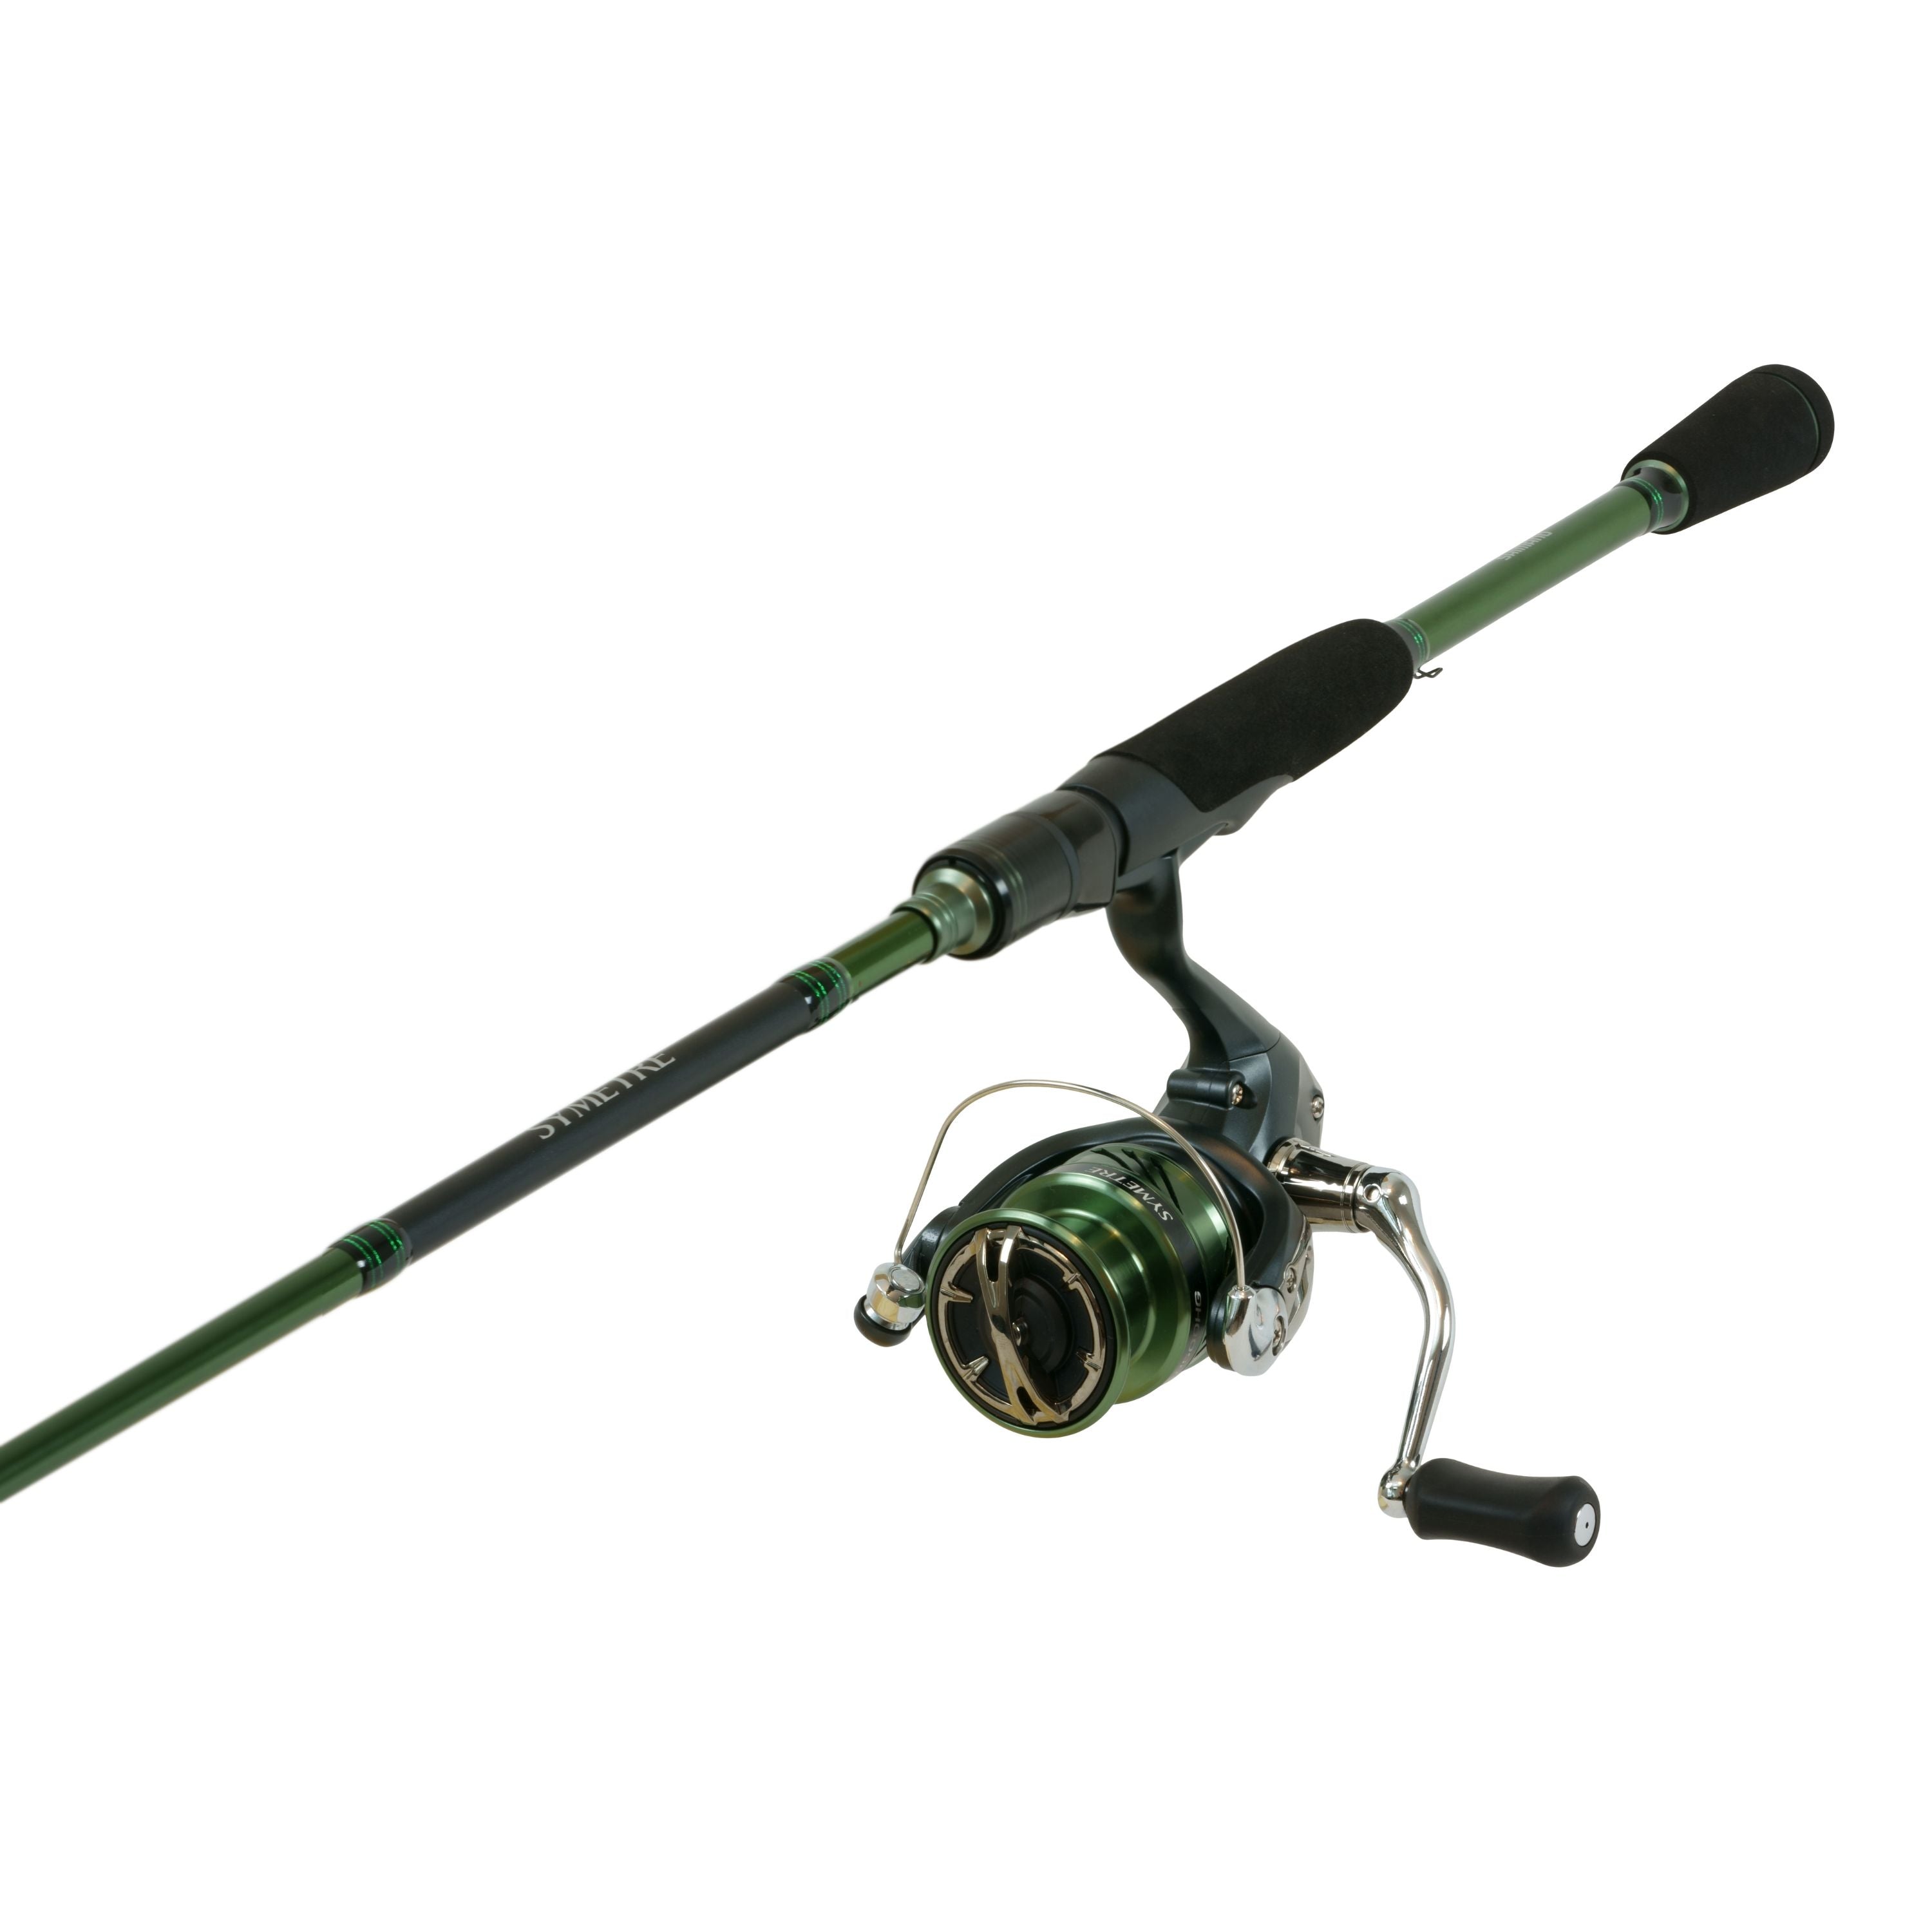 "Symetre" Spinning combo 3000 reel